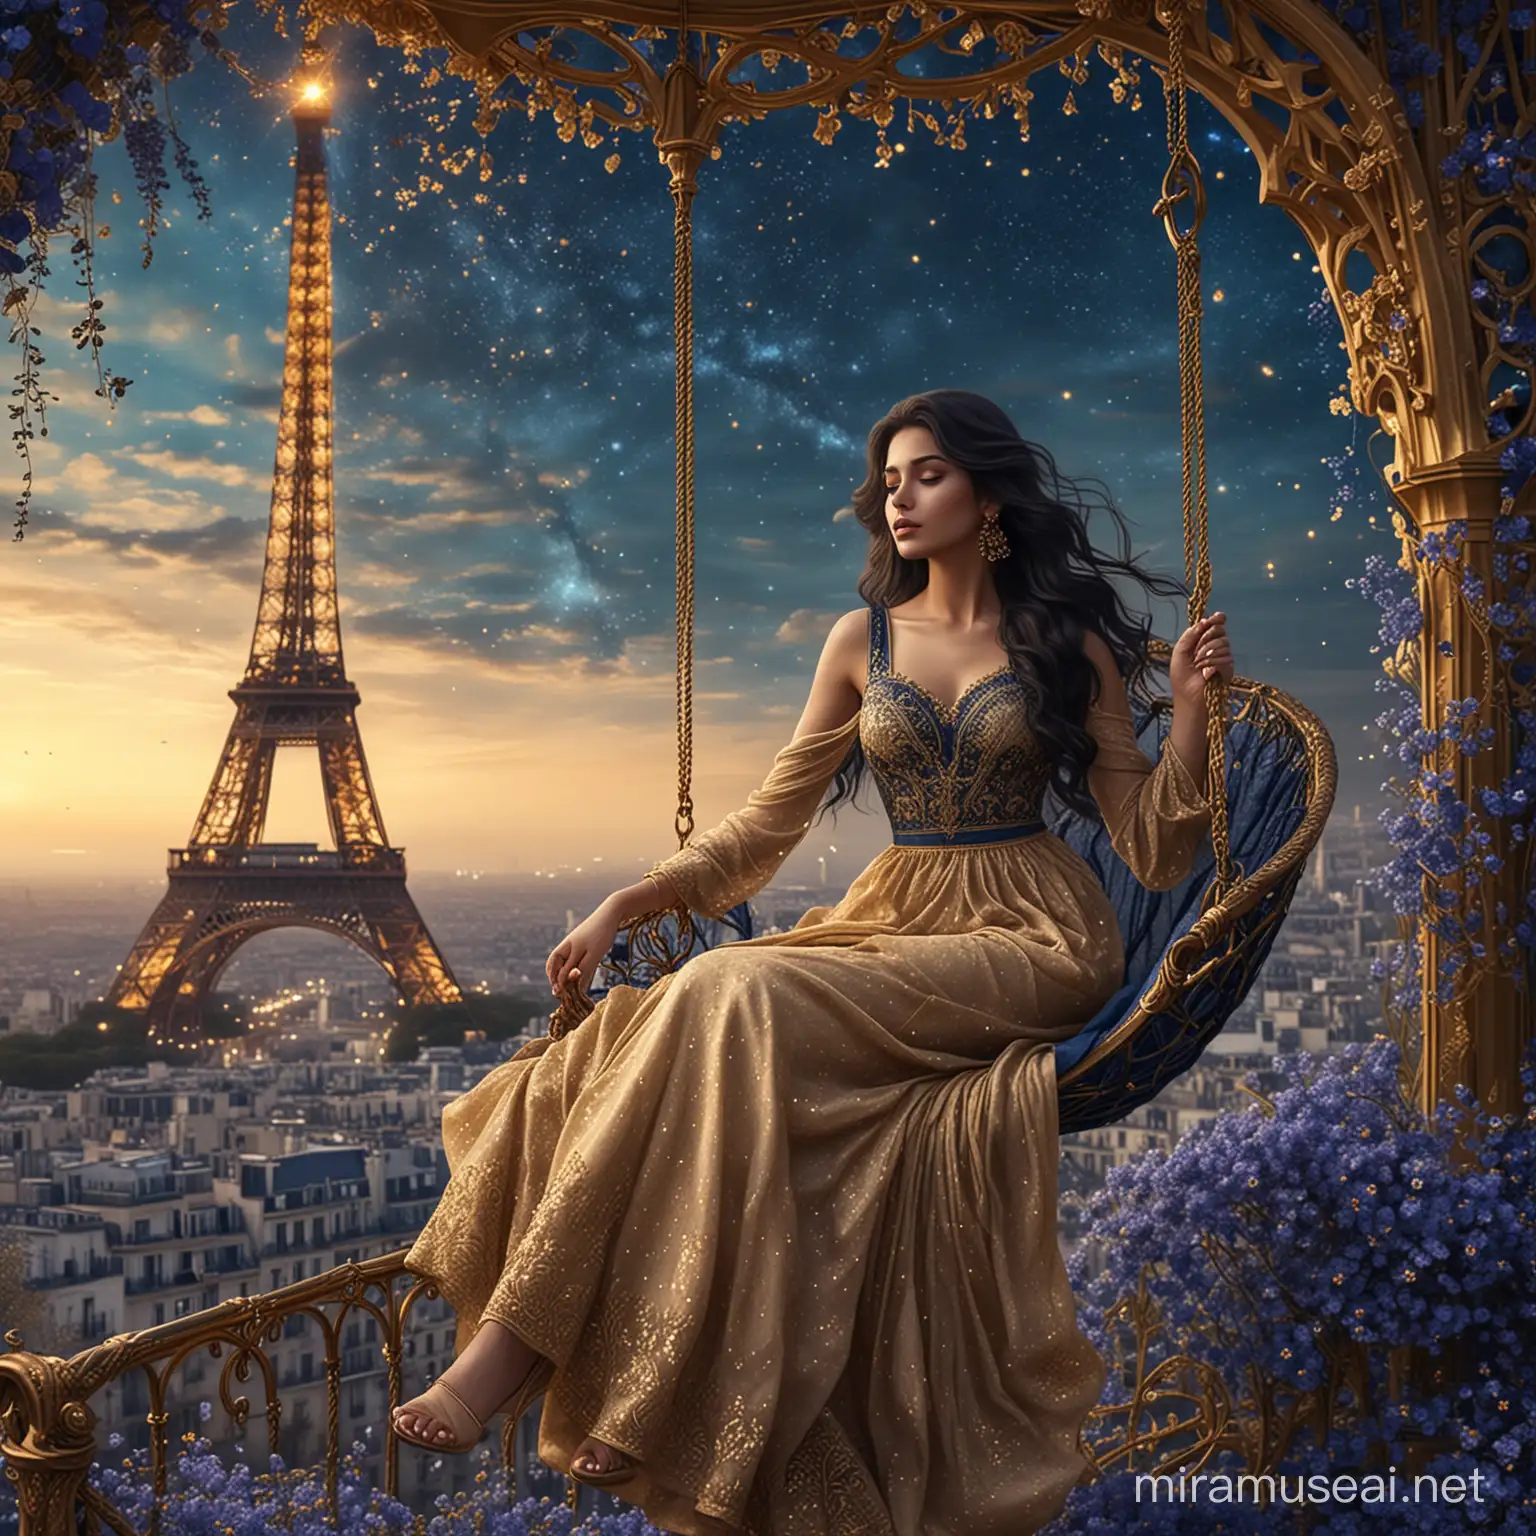 A beautiful woman, sitting on a majestic swing, surrounded by small dark blue flowers and golden dust. Long wavy black hair. Elegant long beige and dark blue dress, haute couture, sari tissu. Background tower effel and golden dust. Background nebula sky with golden light. 8k, fantasy, illustration, digital art, illustration art, fantasy art, fantasy style


